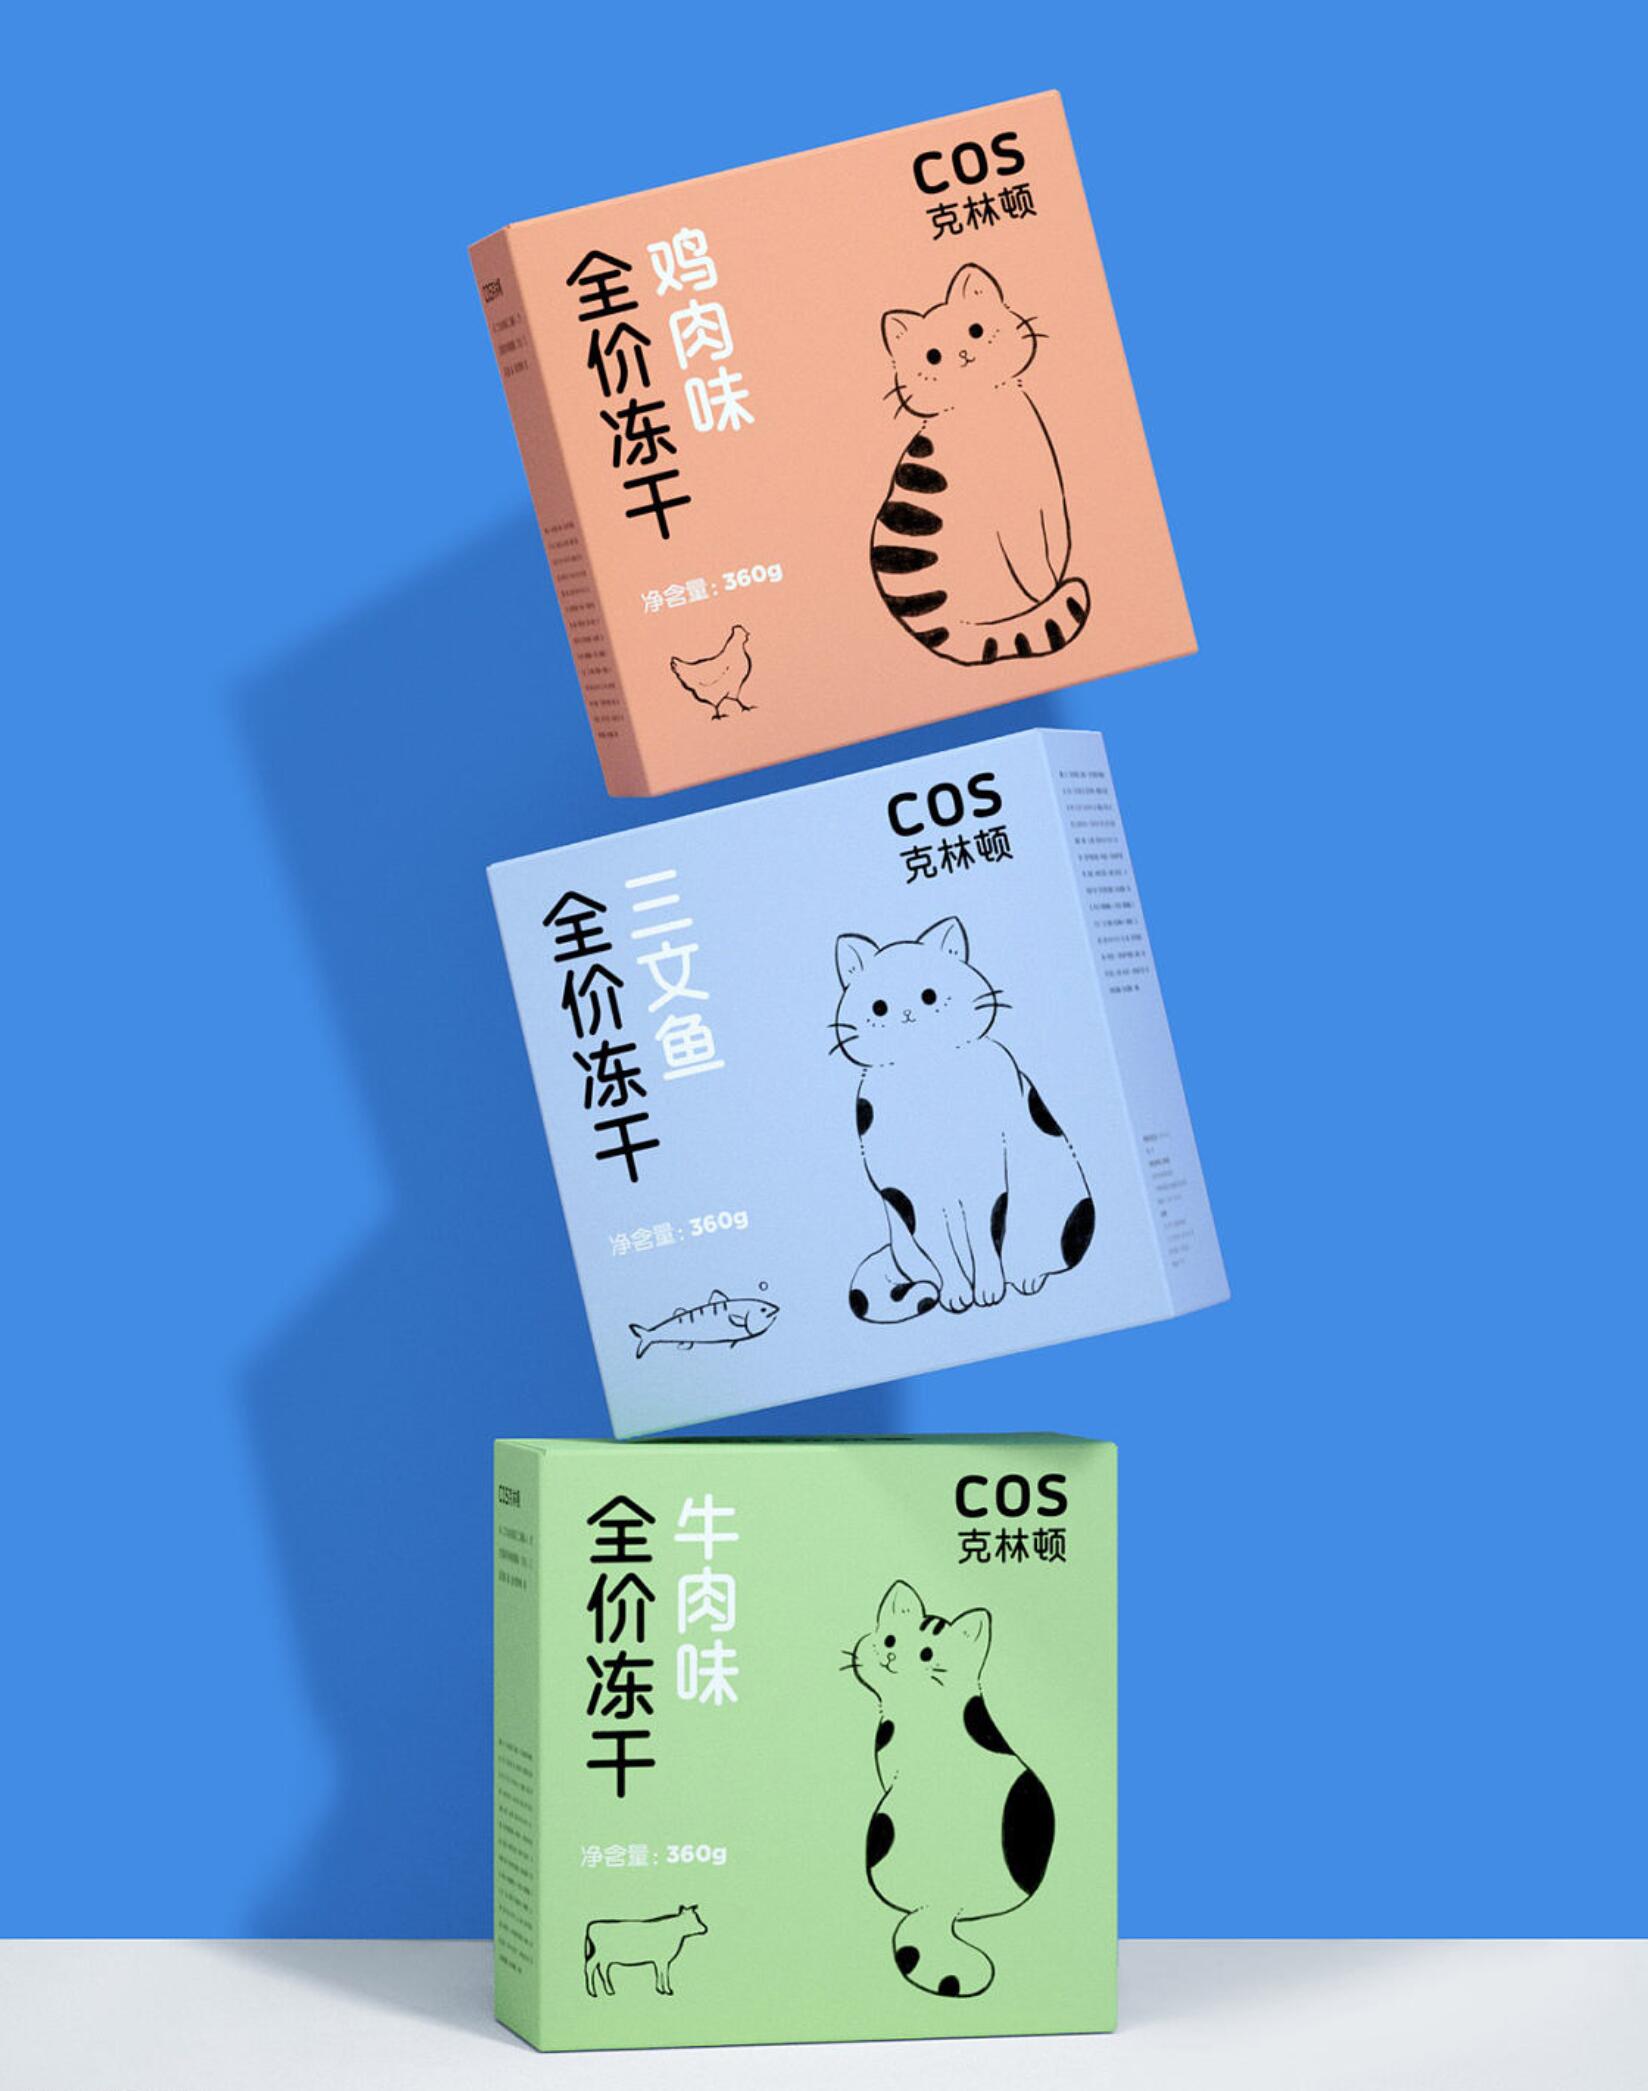 Product Packaging Design for Pet Food